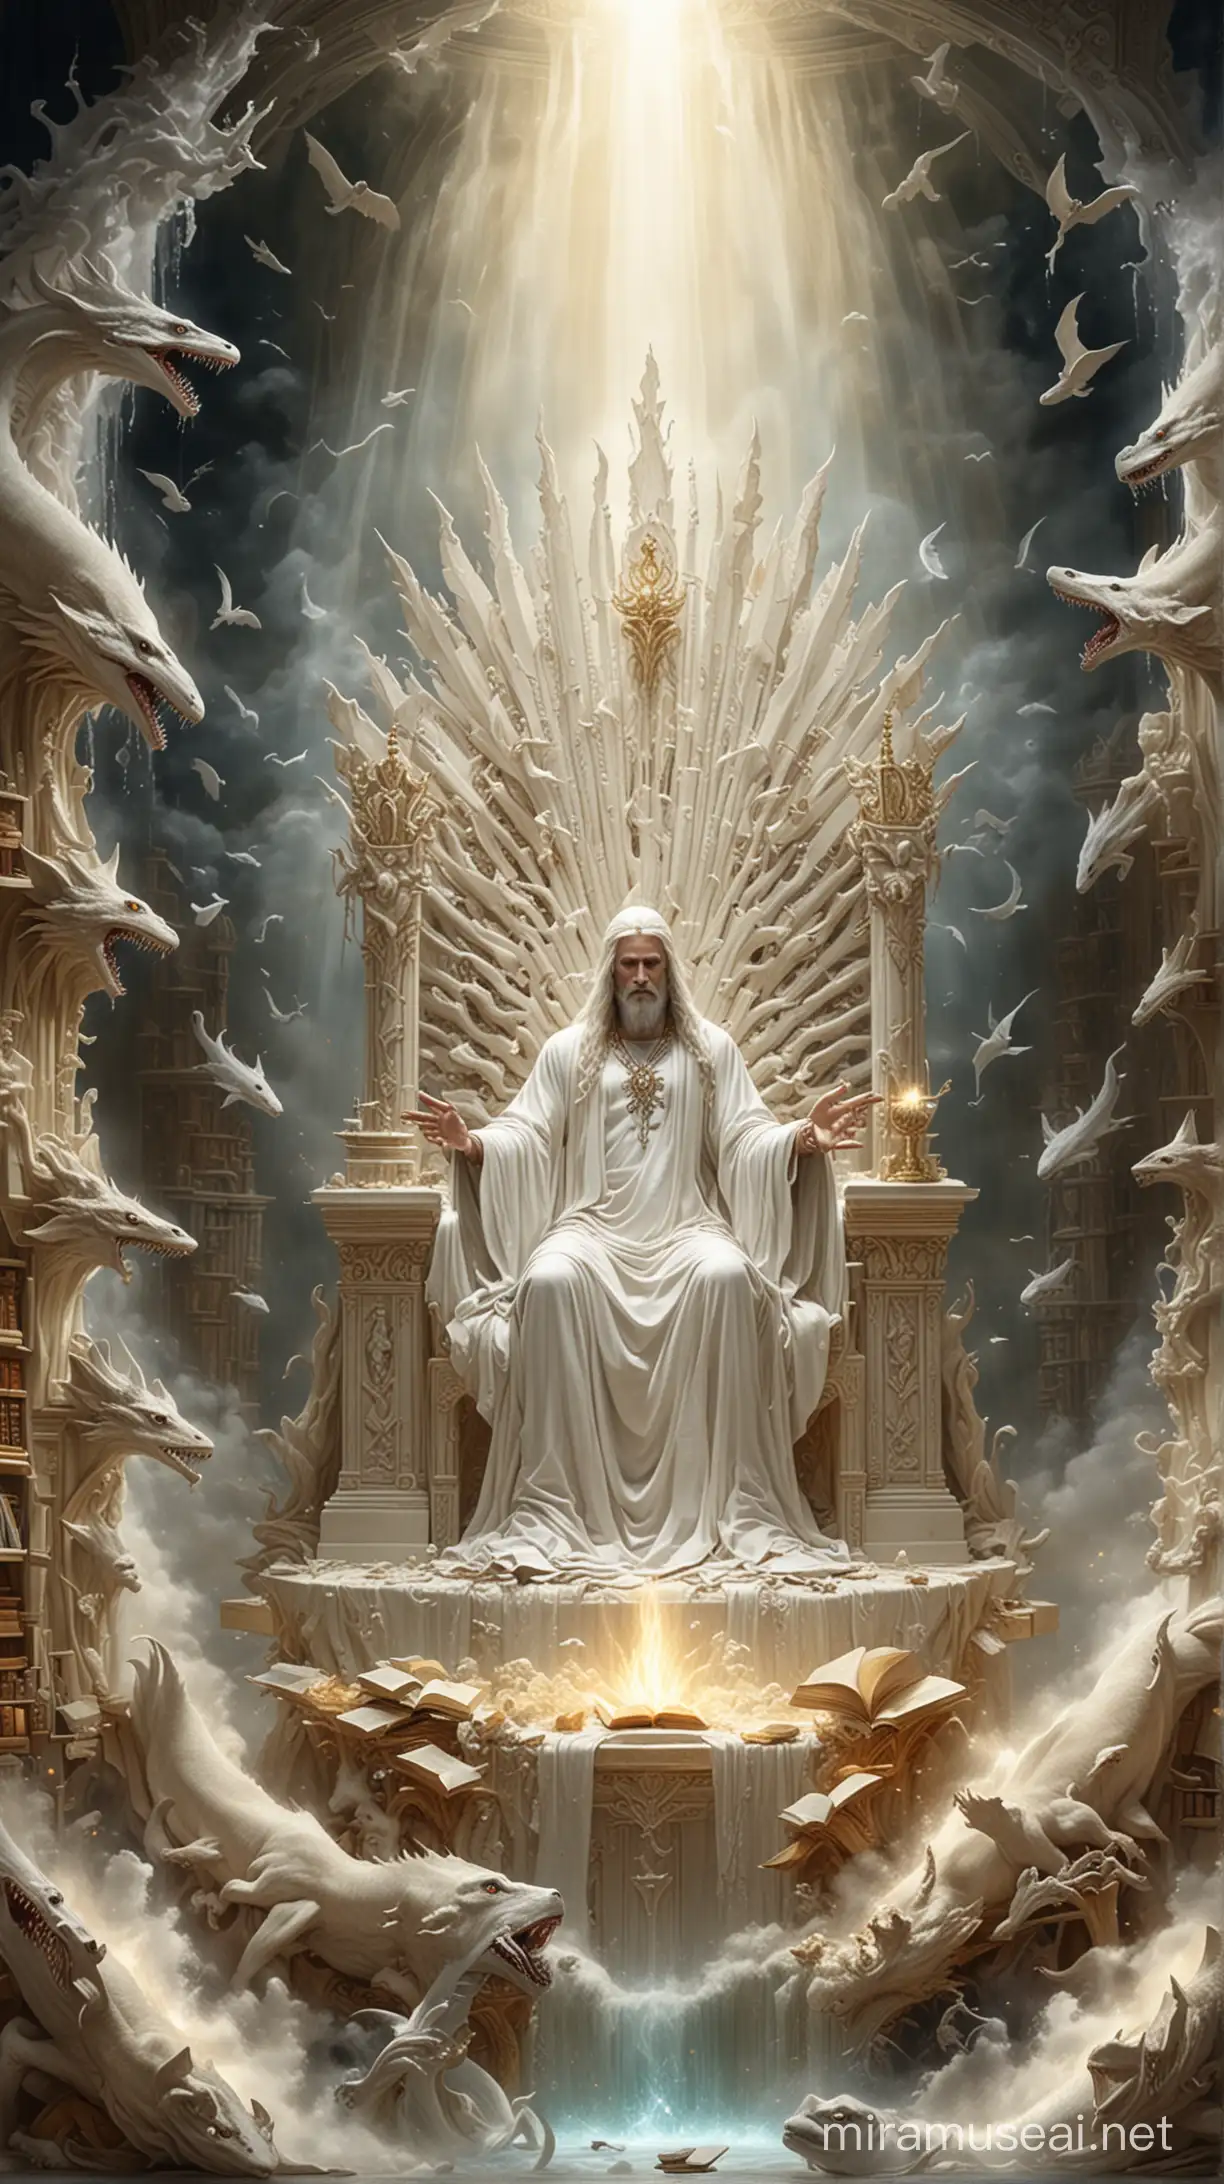 Create a scene depicting a great white throne with a figure seated upon it, radiating an aura of divine authority, while the earth and heaven flee away in fear and books were open before the thone.